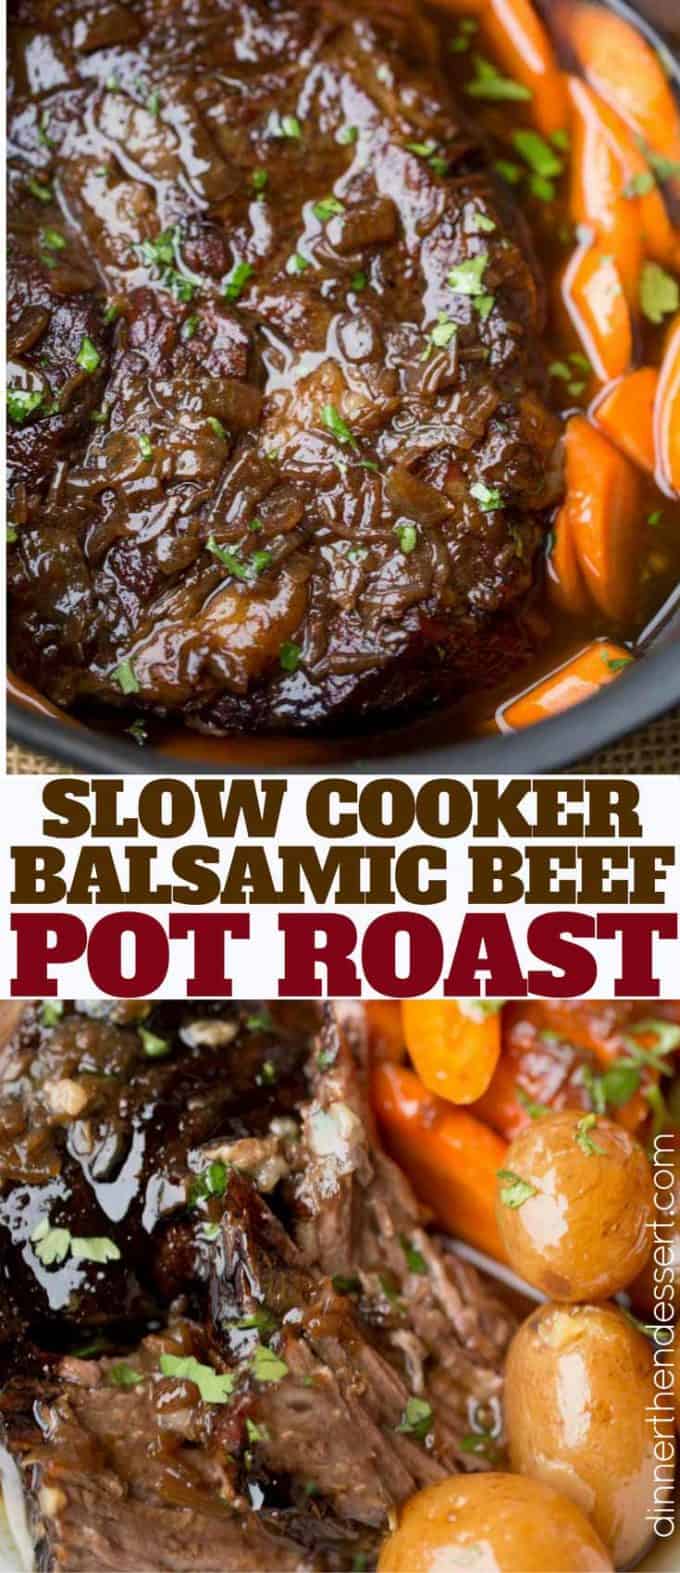 One pot meal, this Slow Cooker Balsamic Pot Roast has carrots and potatoes too.